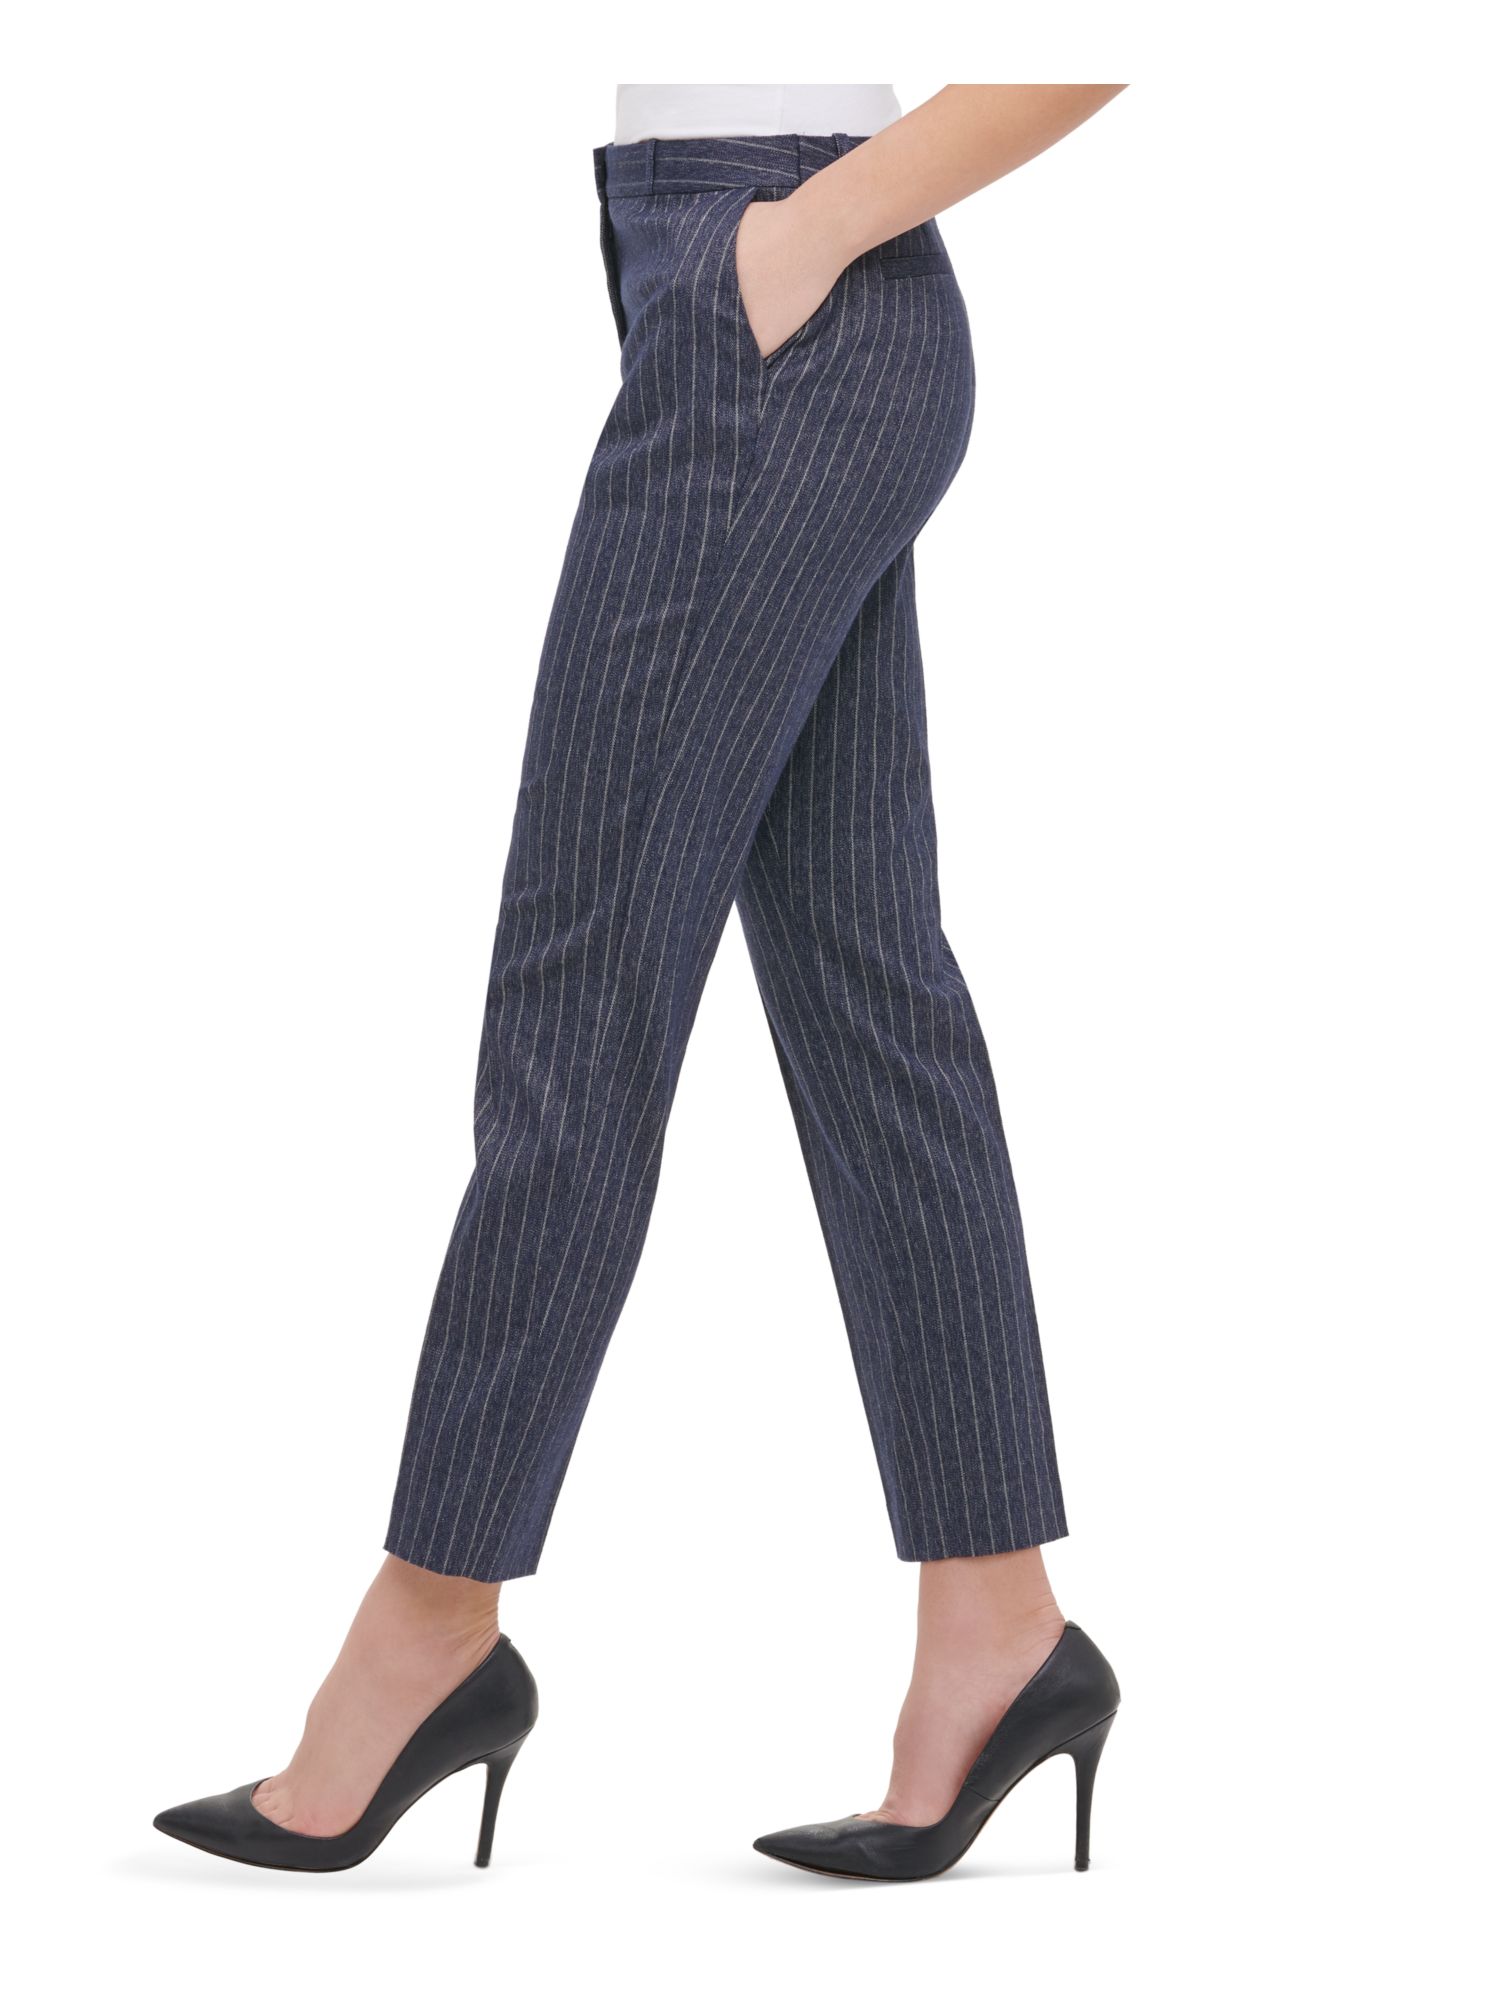 TOMMY HILFIGER Womens Navy Zippered Pinstripe Pants Size: 12 - image 3 of 4